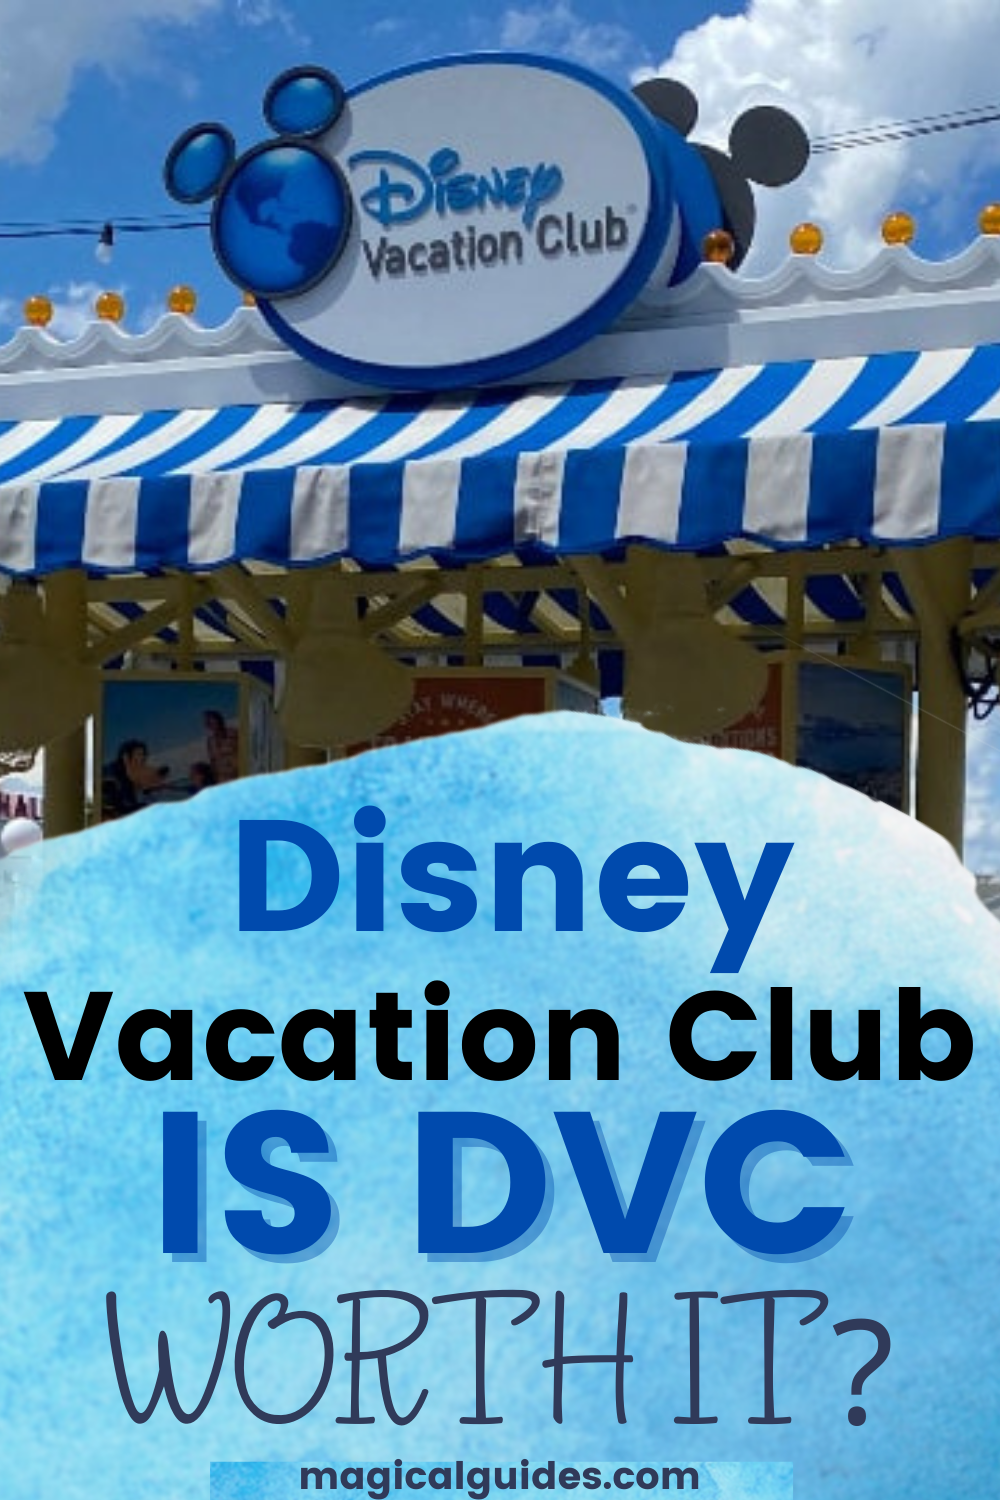 Everything you need to know about Disney Vacation Club if you are considering joining Disney's timeshare program. DVC can help you save money on your Disney vacation. Is it worth it? Find out!